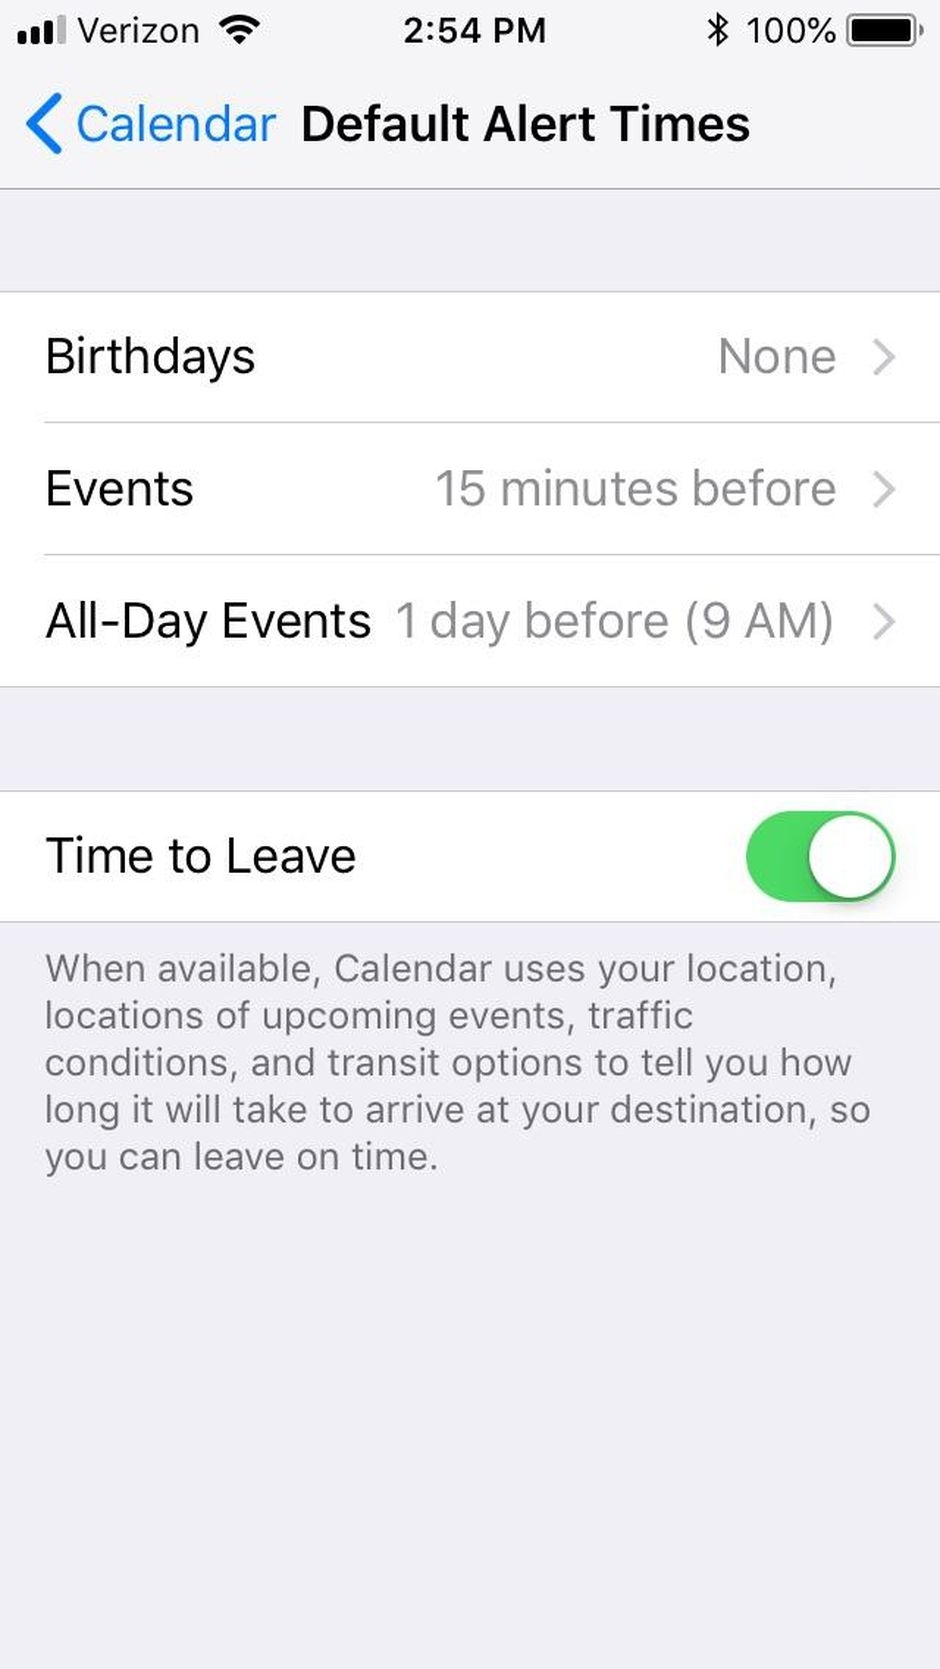 7 Iphone Calendar Tips Everyone Should Know - Cnet